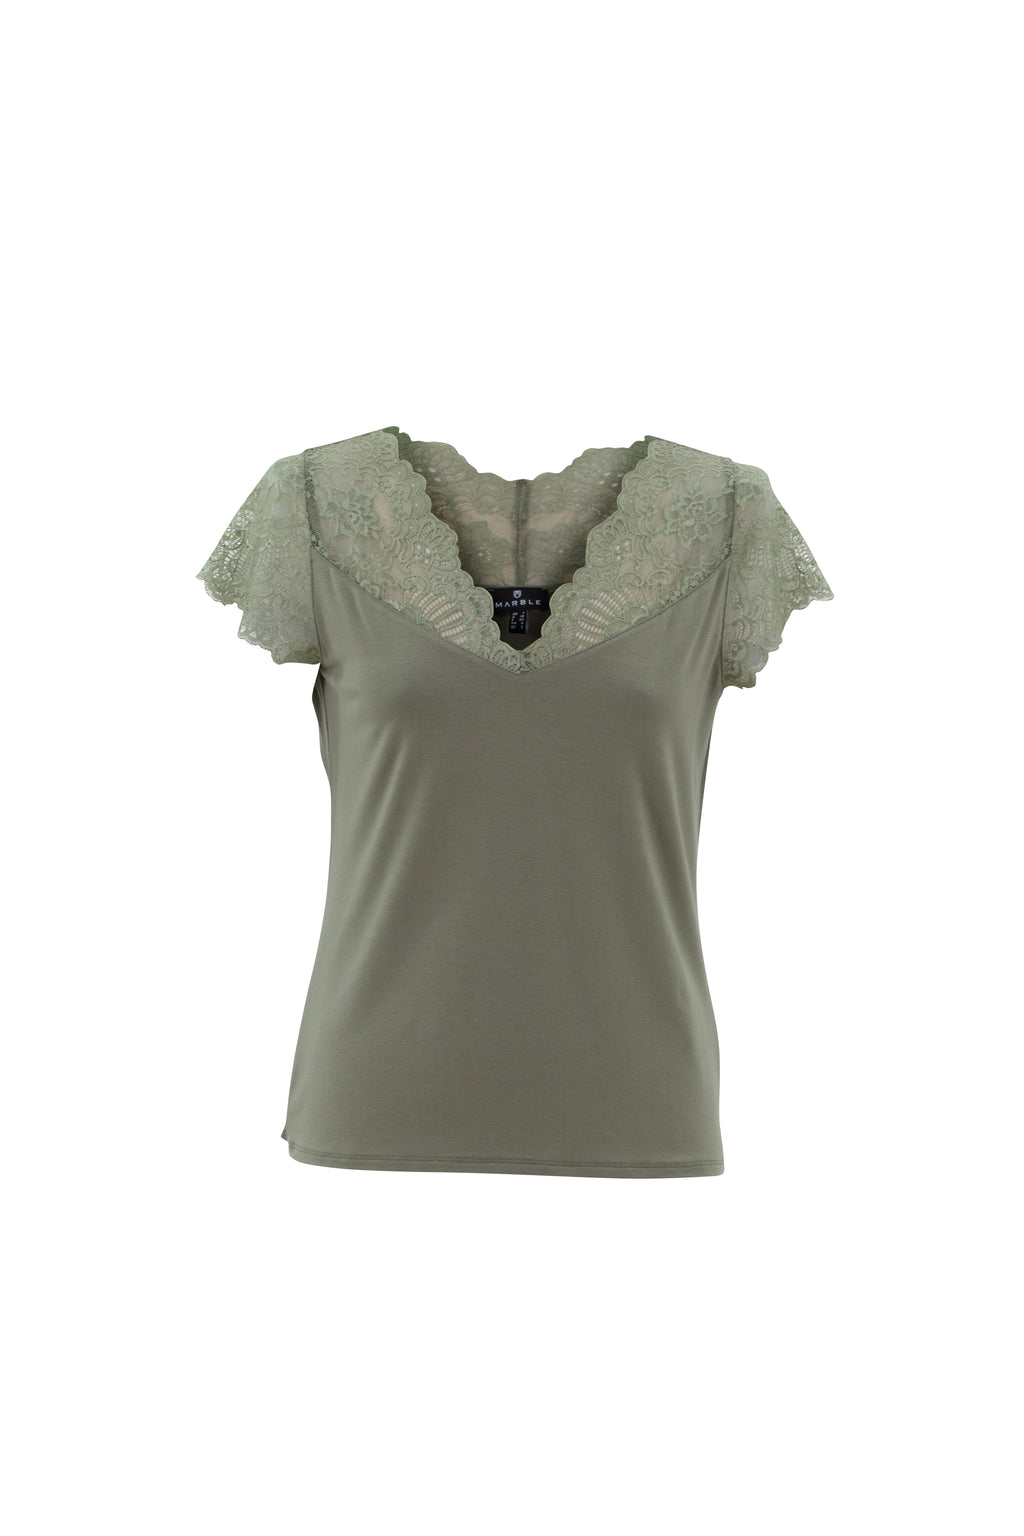 Marble lace trim top in khaki code 7031-123